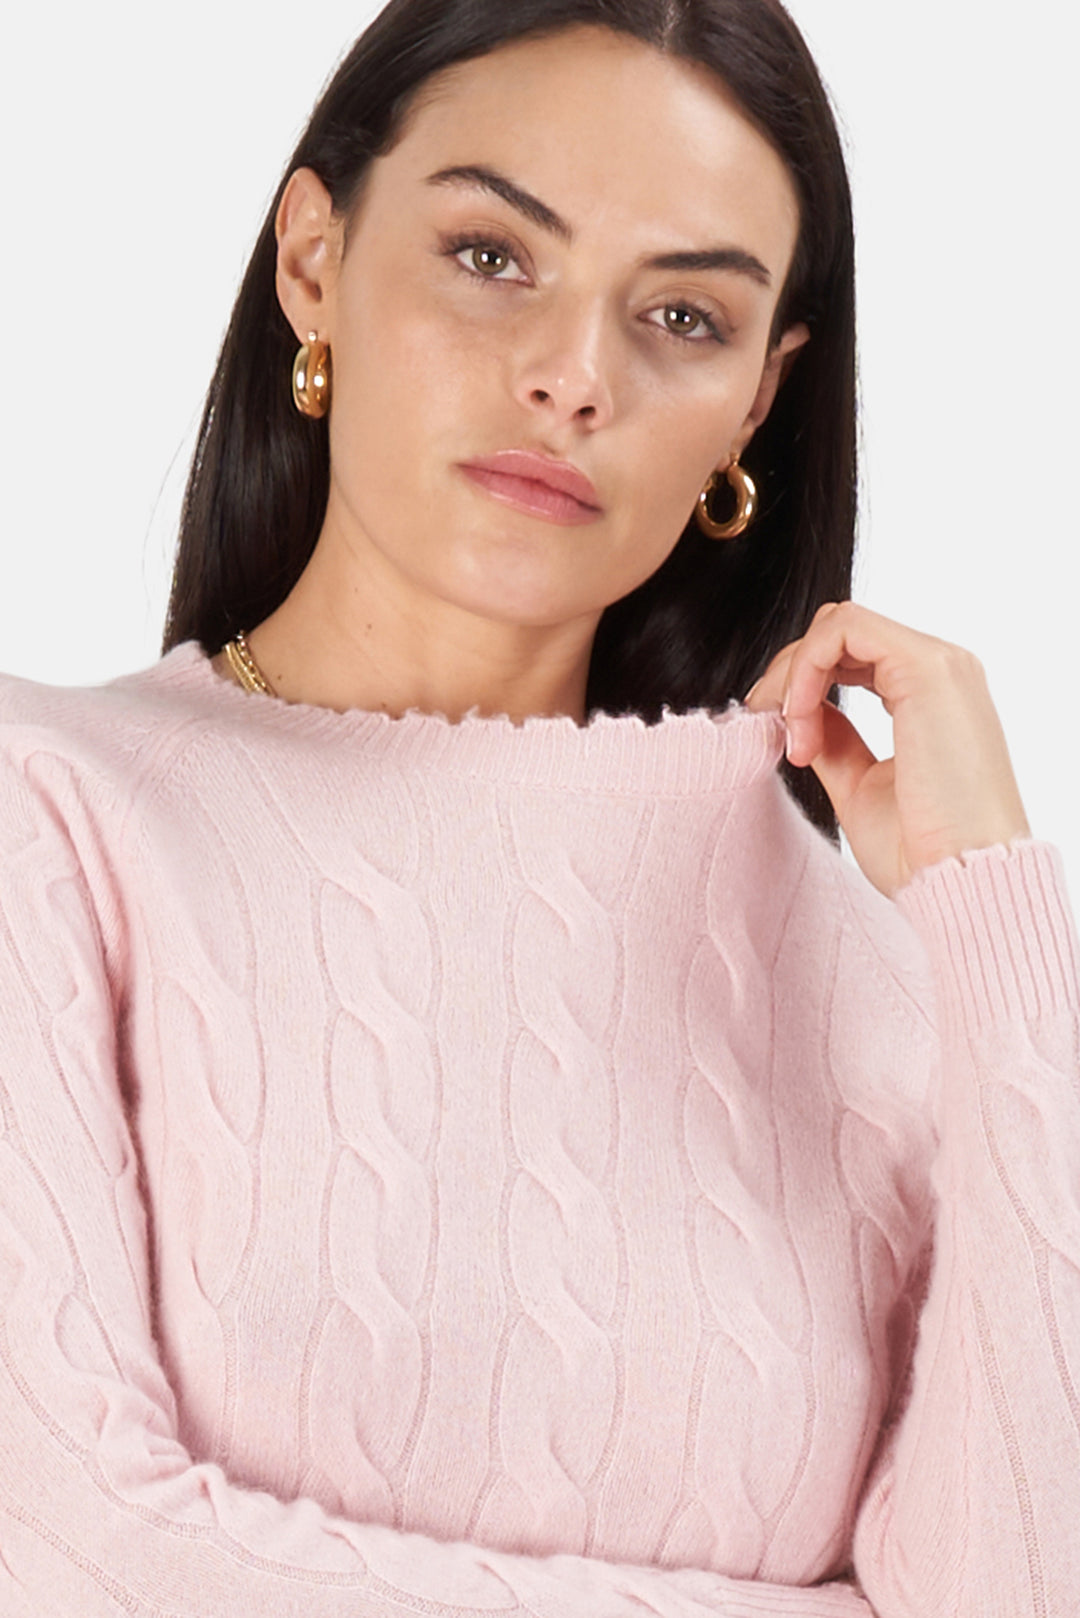 Minnie Rose Pink Sand Cable Frayed Crew - blueandcream